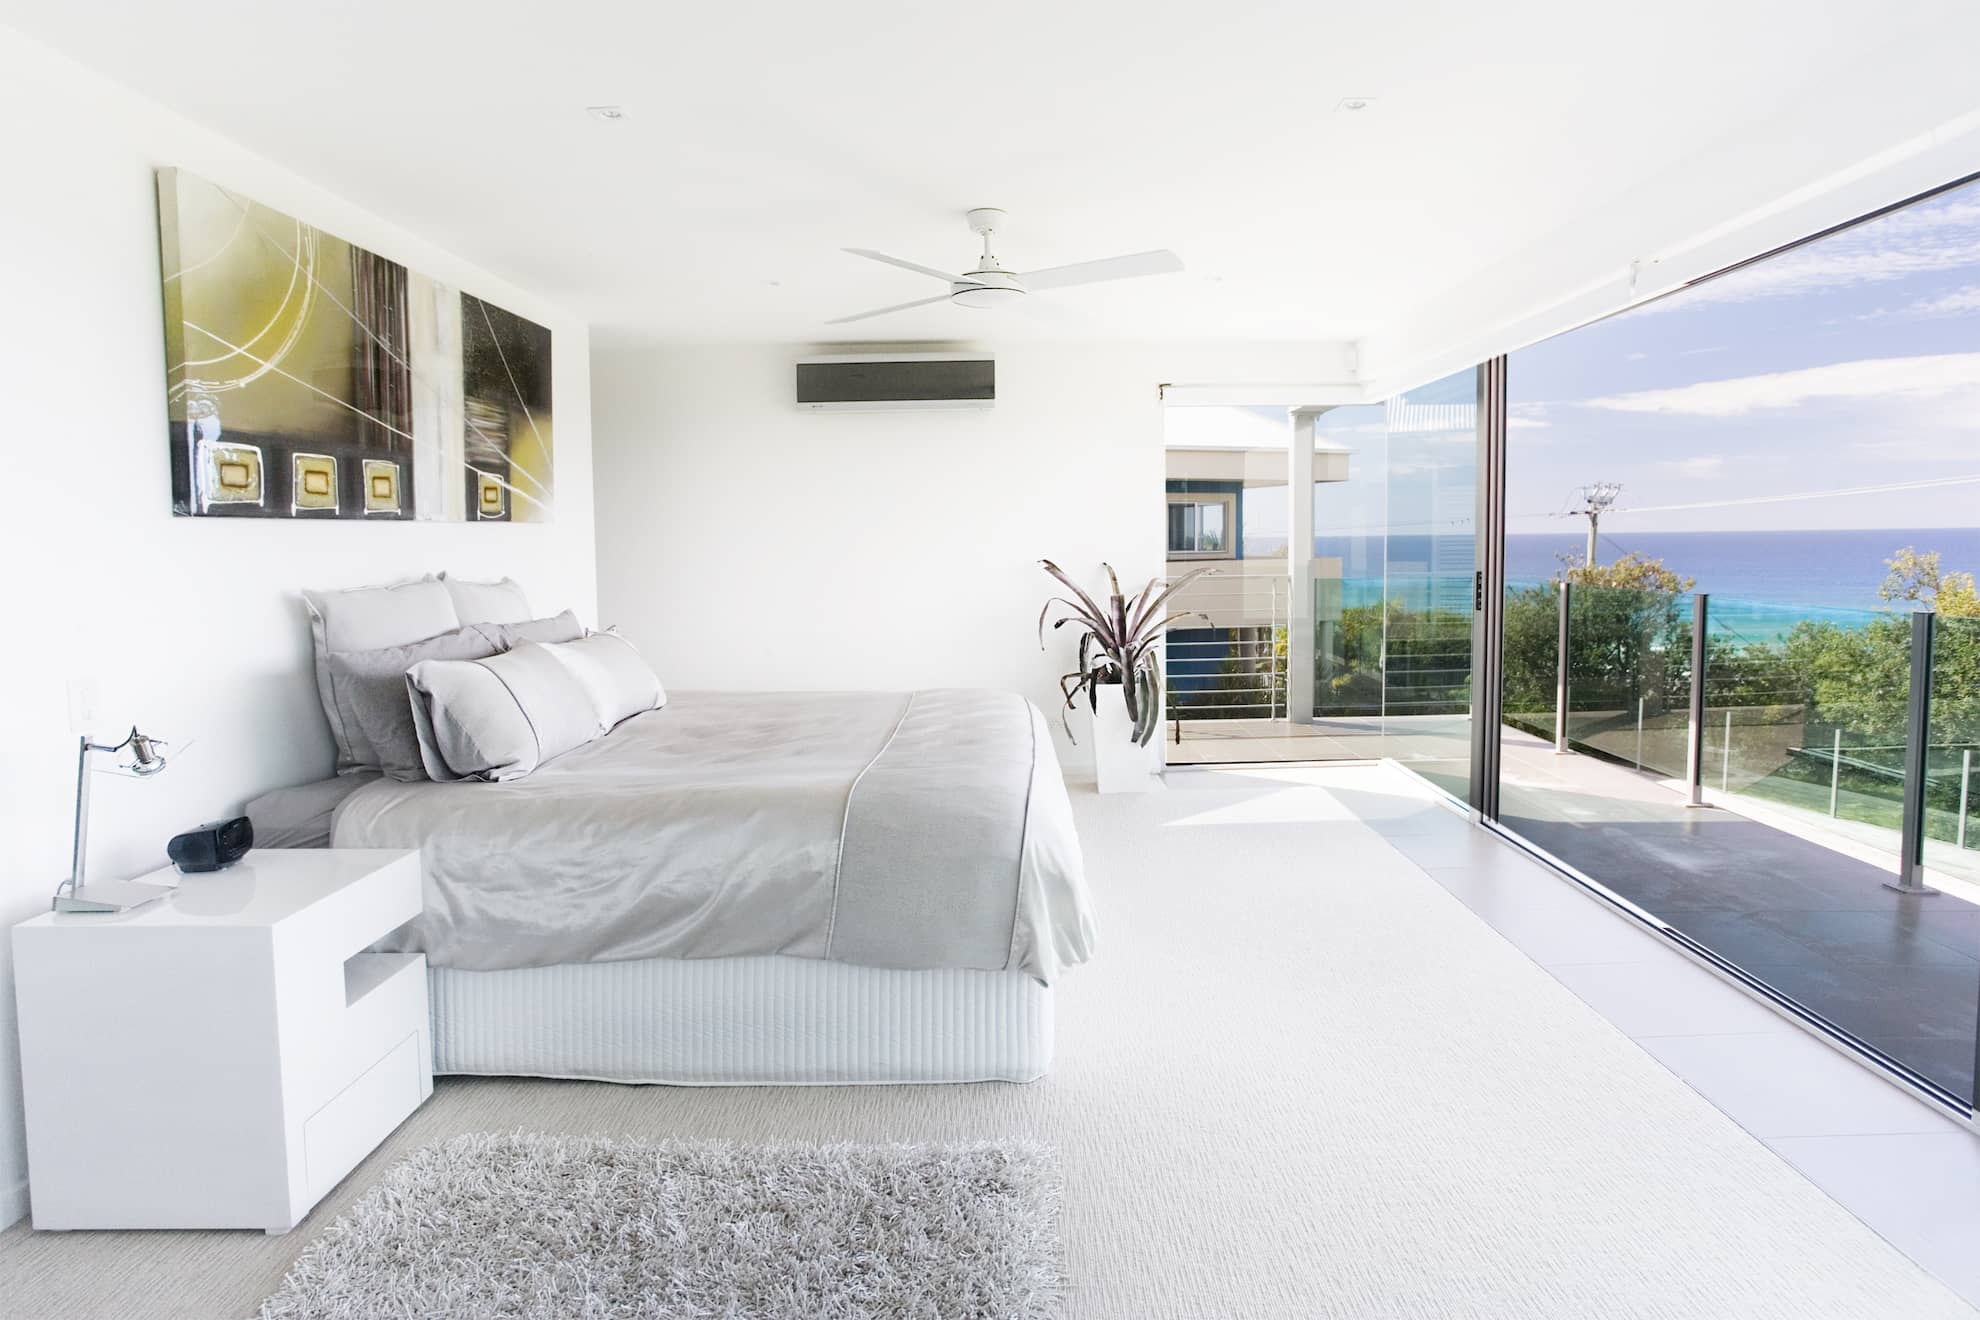 Renovations by mdesign, a building design practice that operates on the Sunshine Coast.